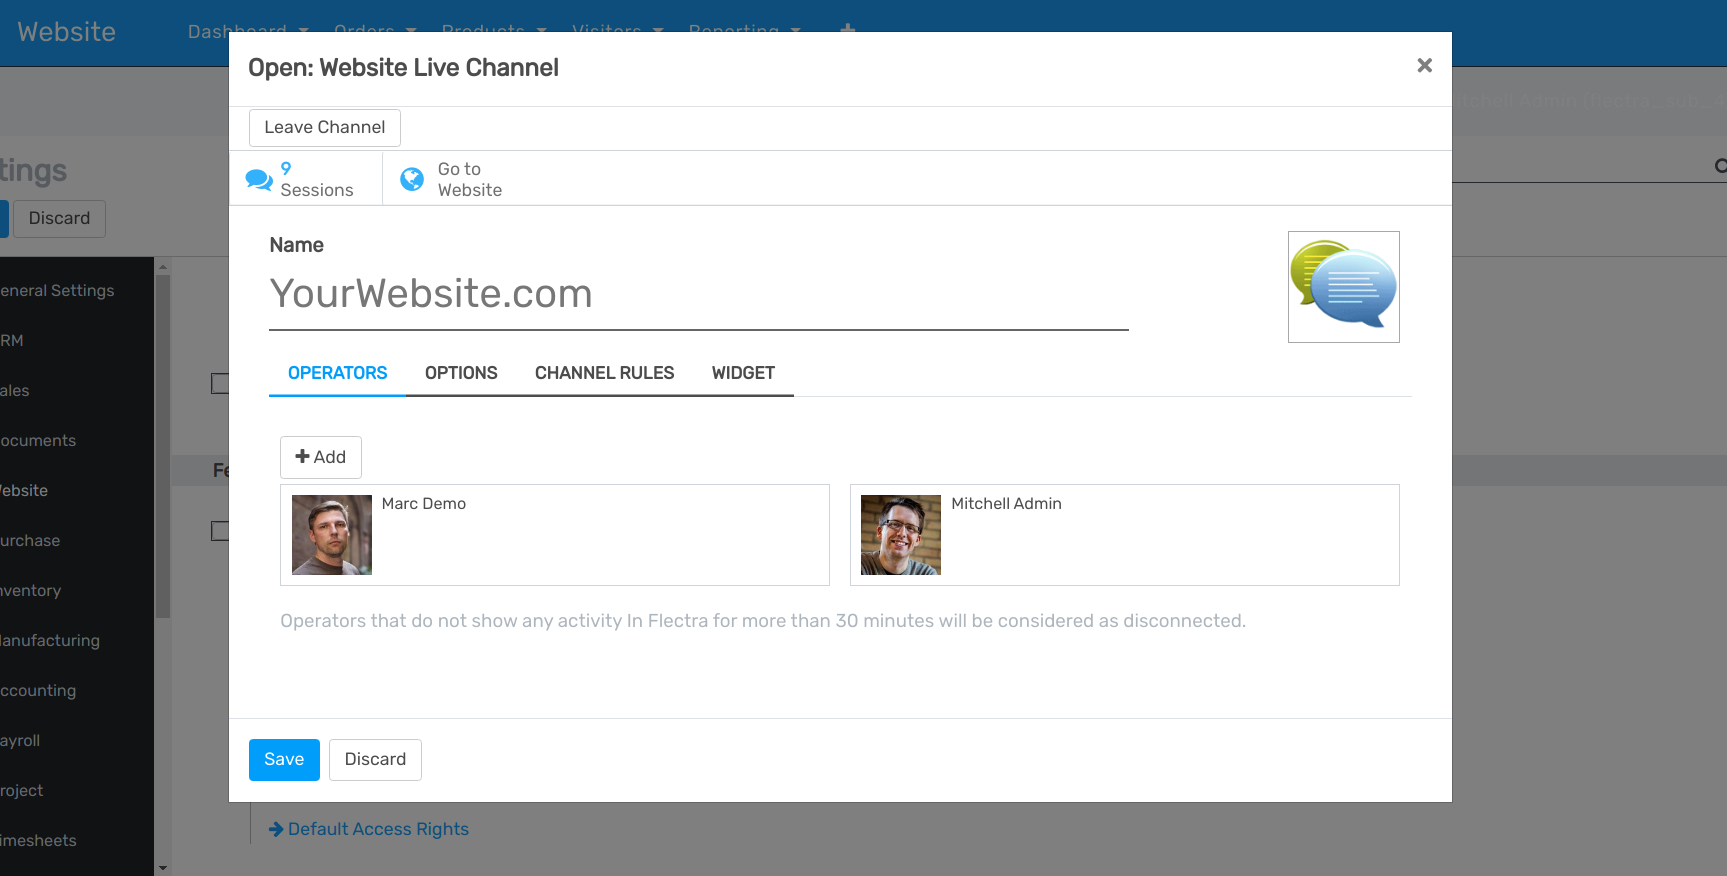 View of a live chat channel form for Flectra Live Chat